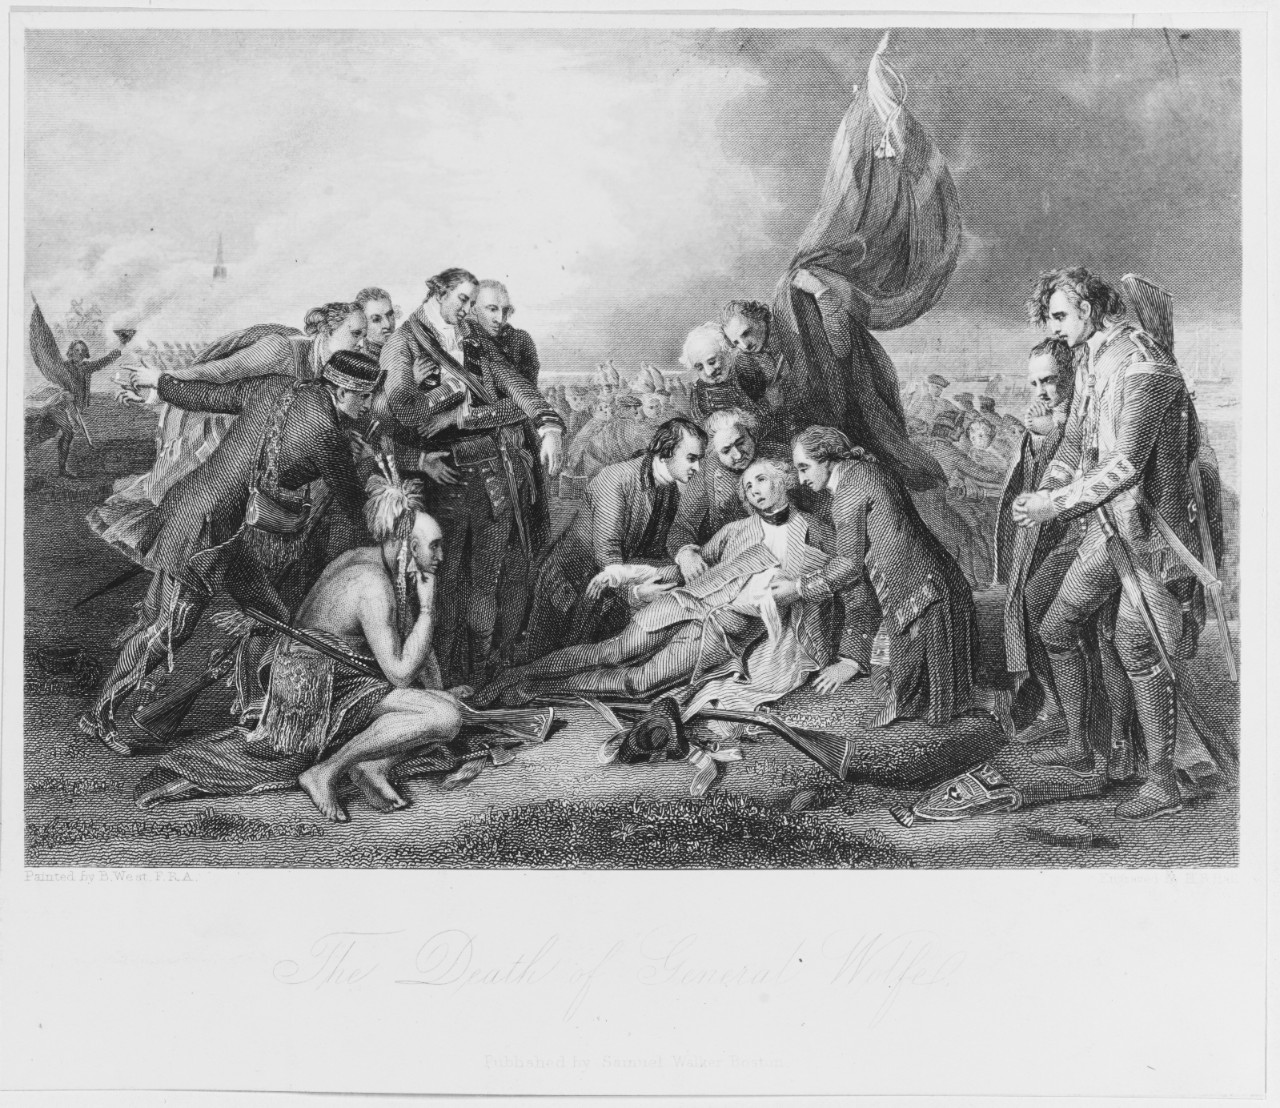 The Death of General Wolfe, 13 September 1759